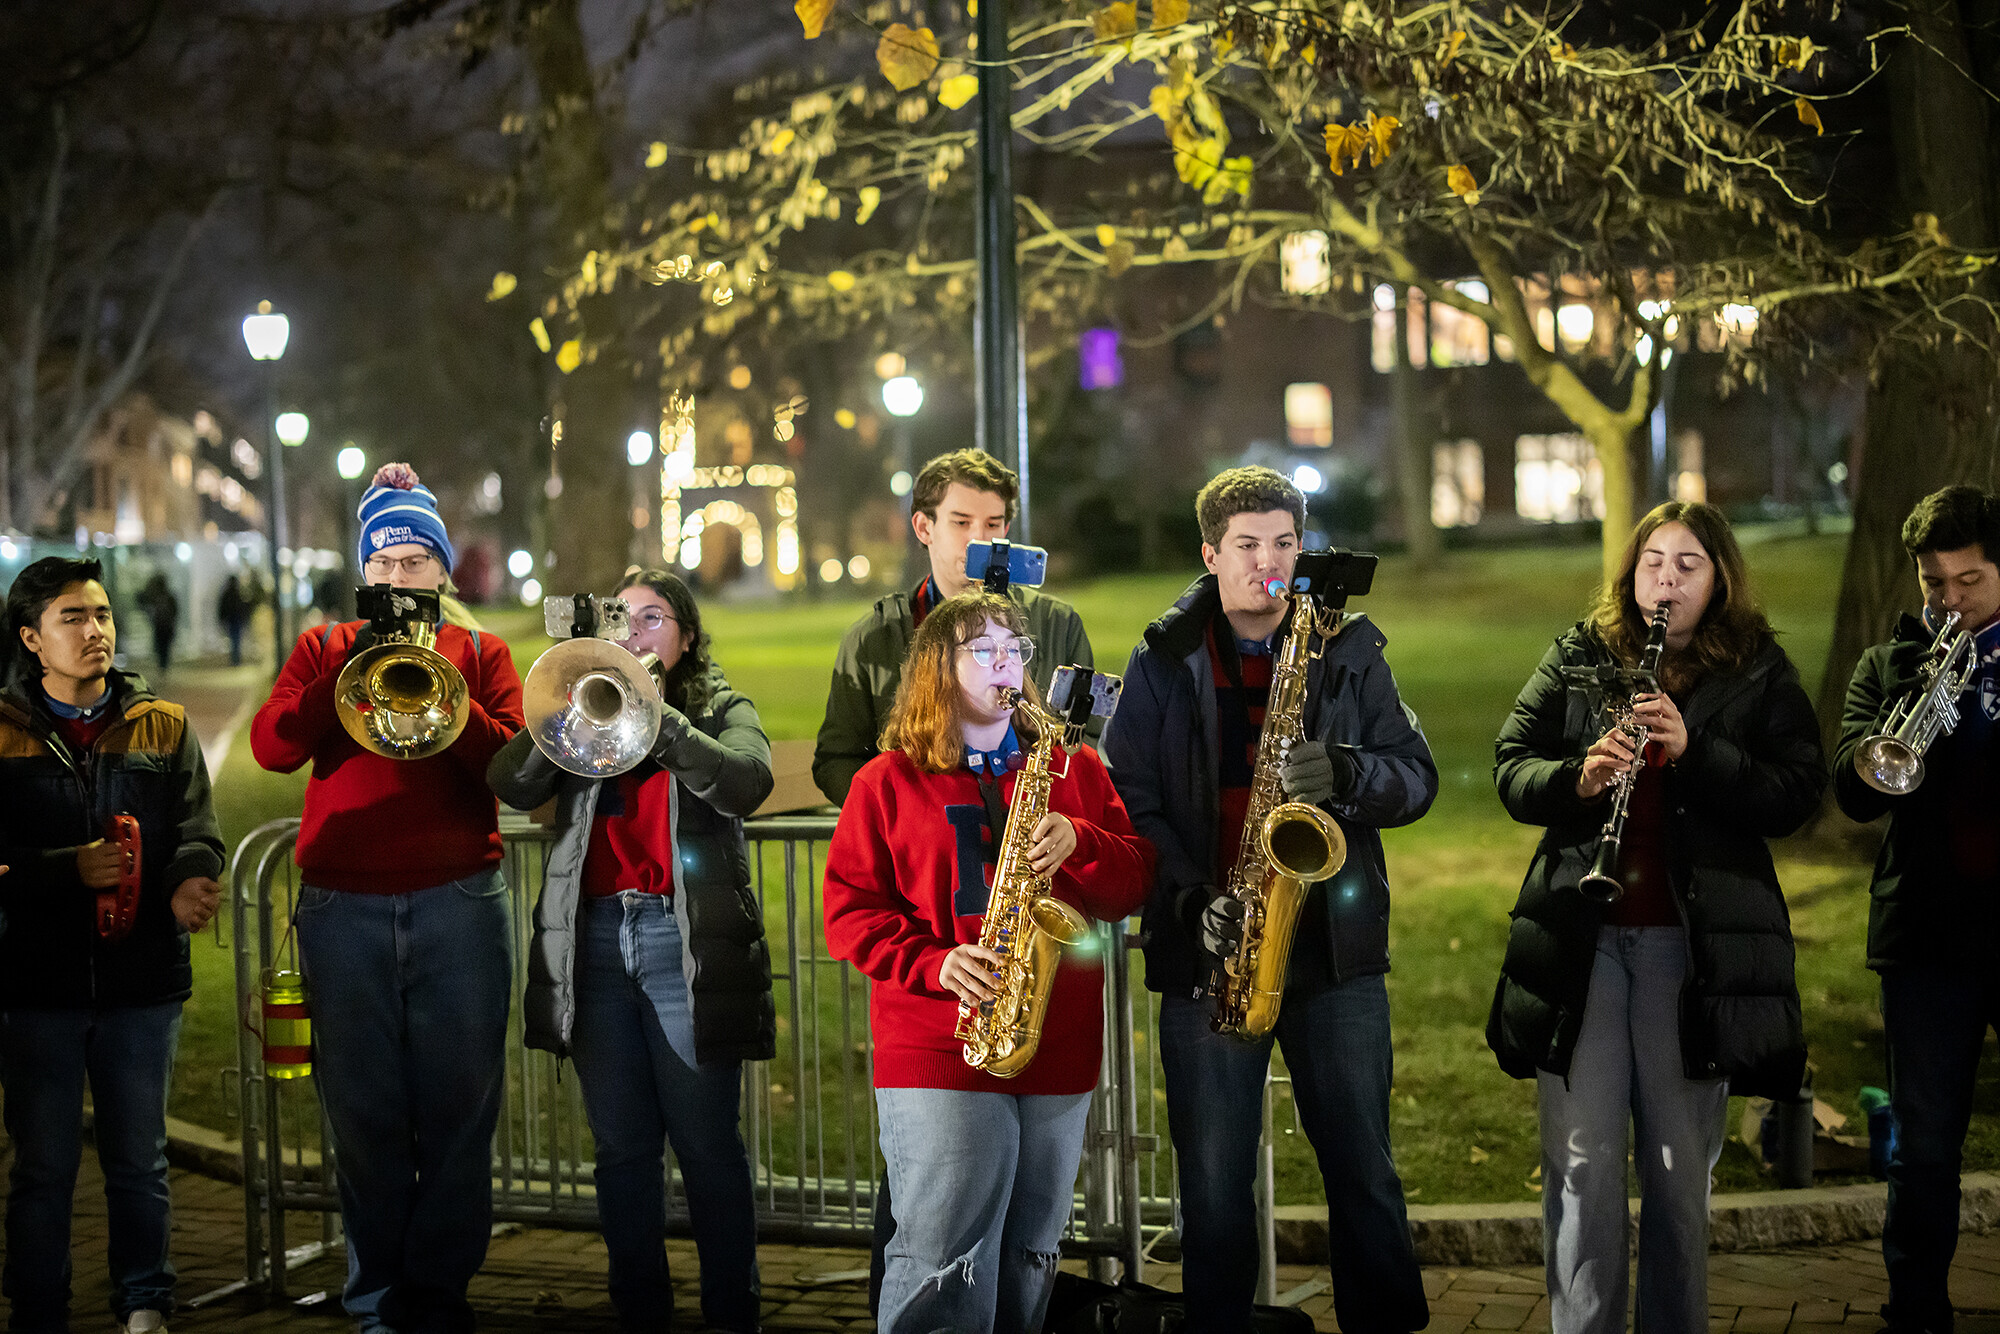 The Penn Band playing in front of College Hall at a Hanukkah ceremony.